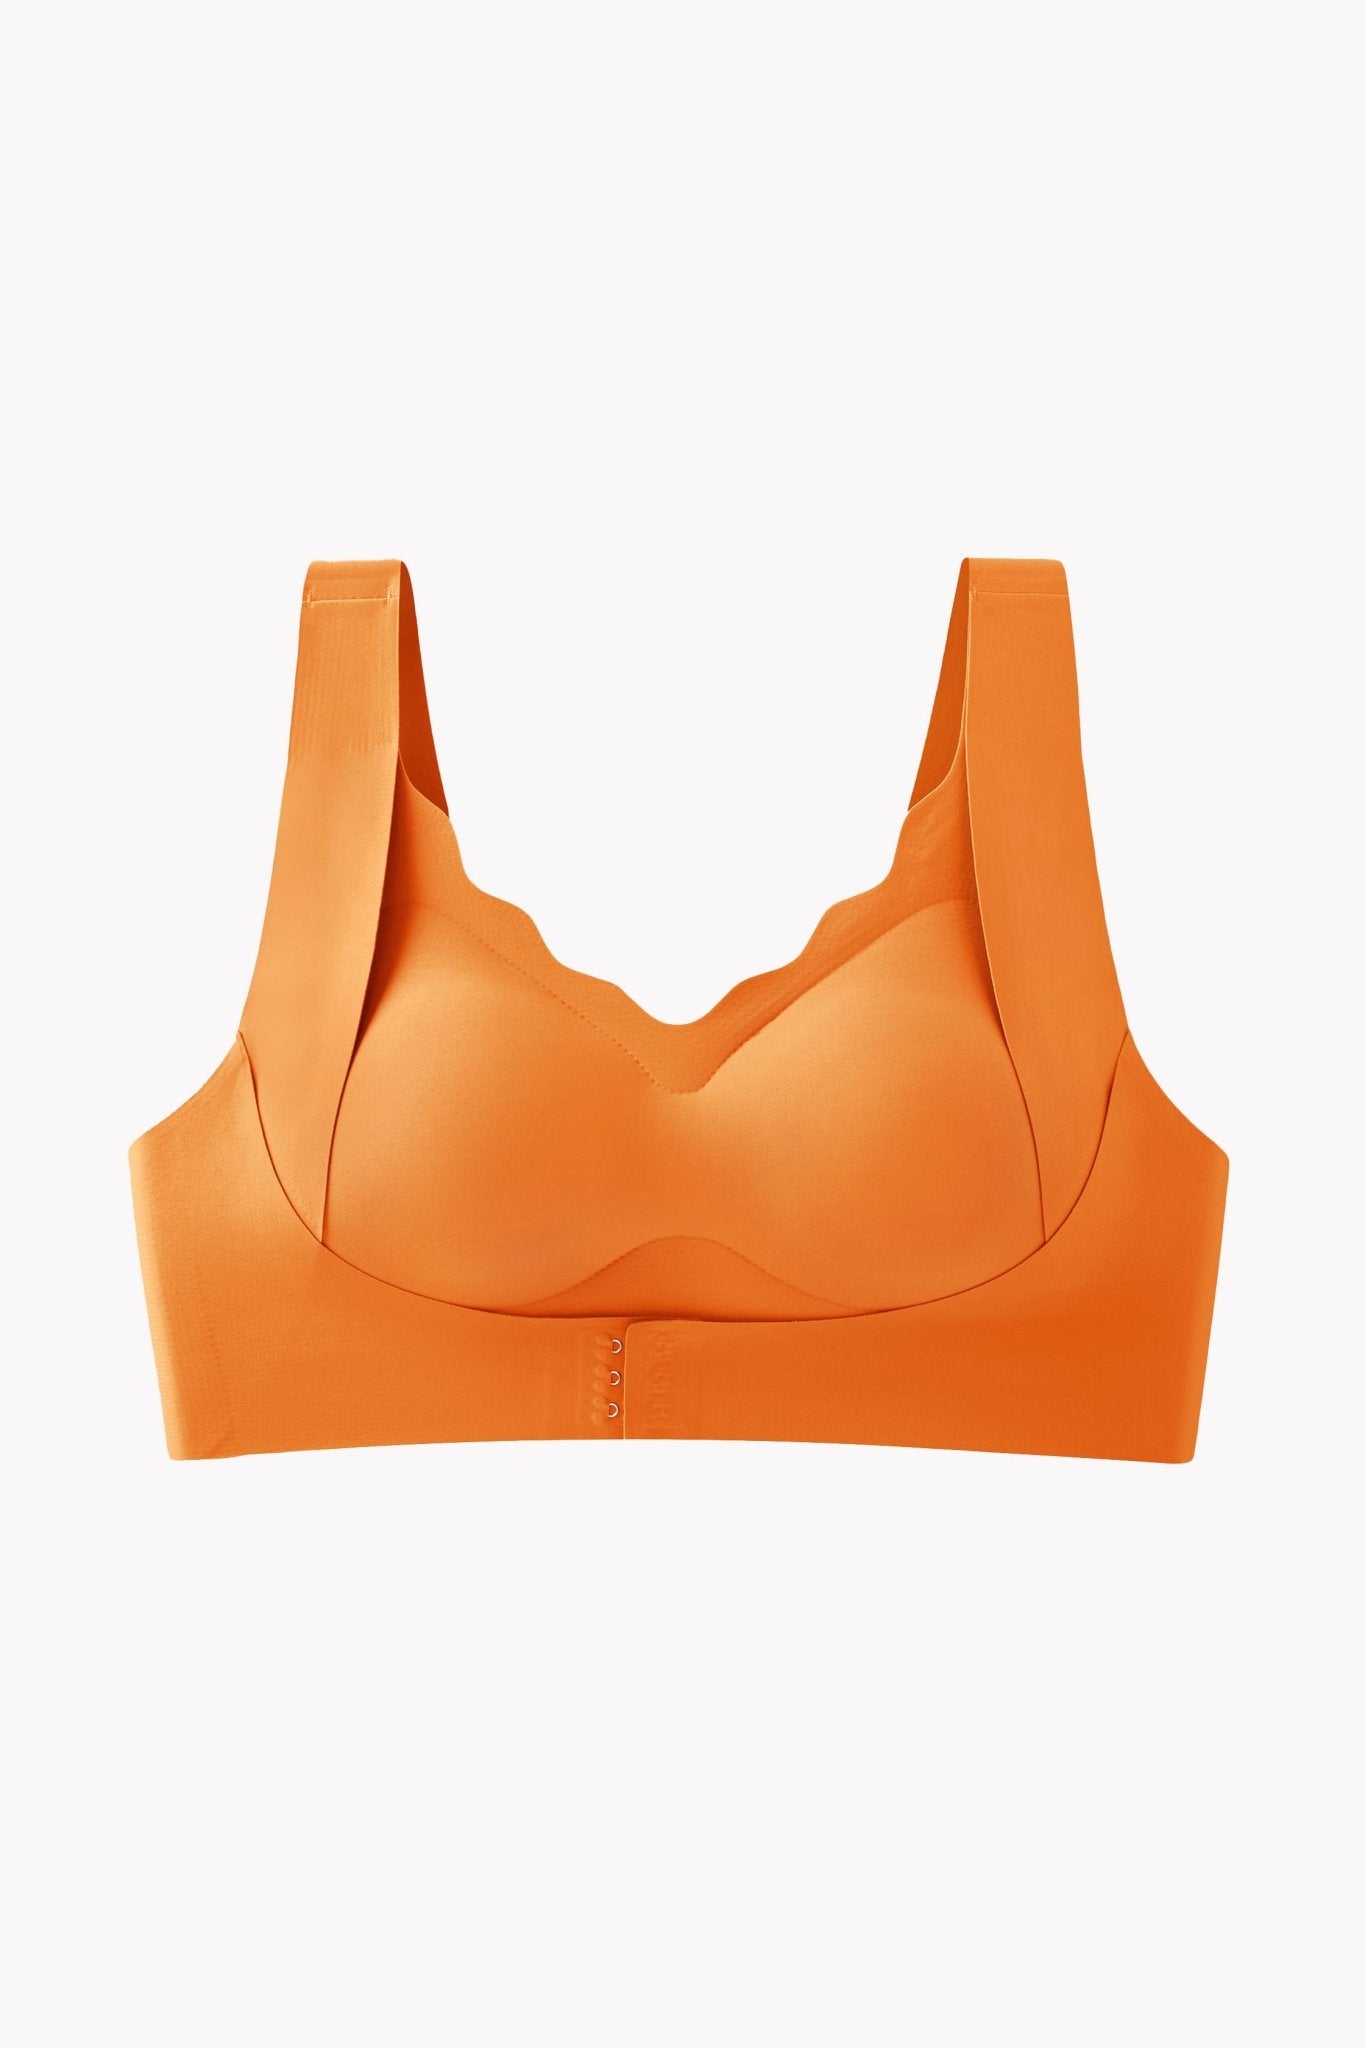 Easy Pieces™️ Front Closure Push-Up Wire Free Bra - POSESHE